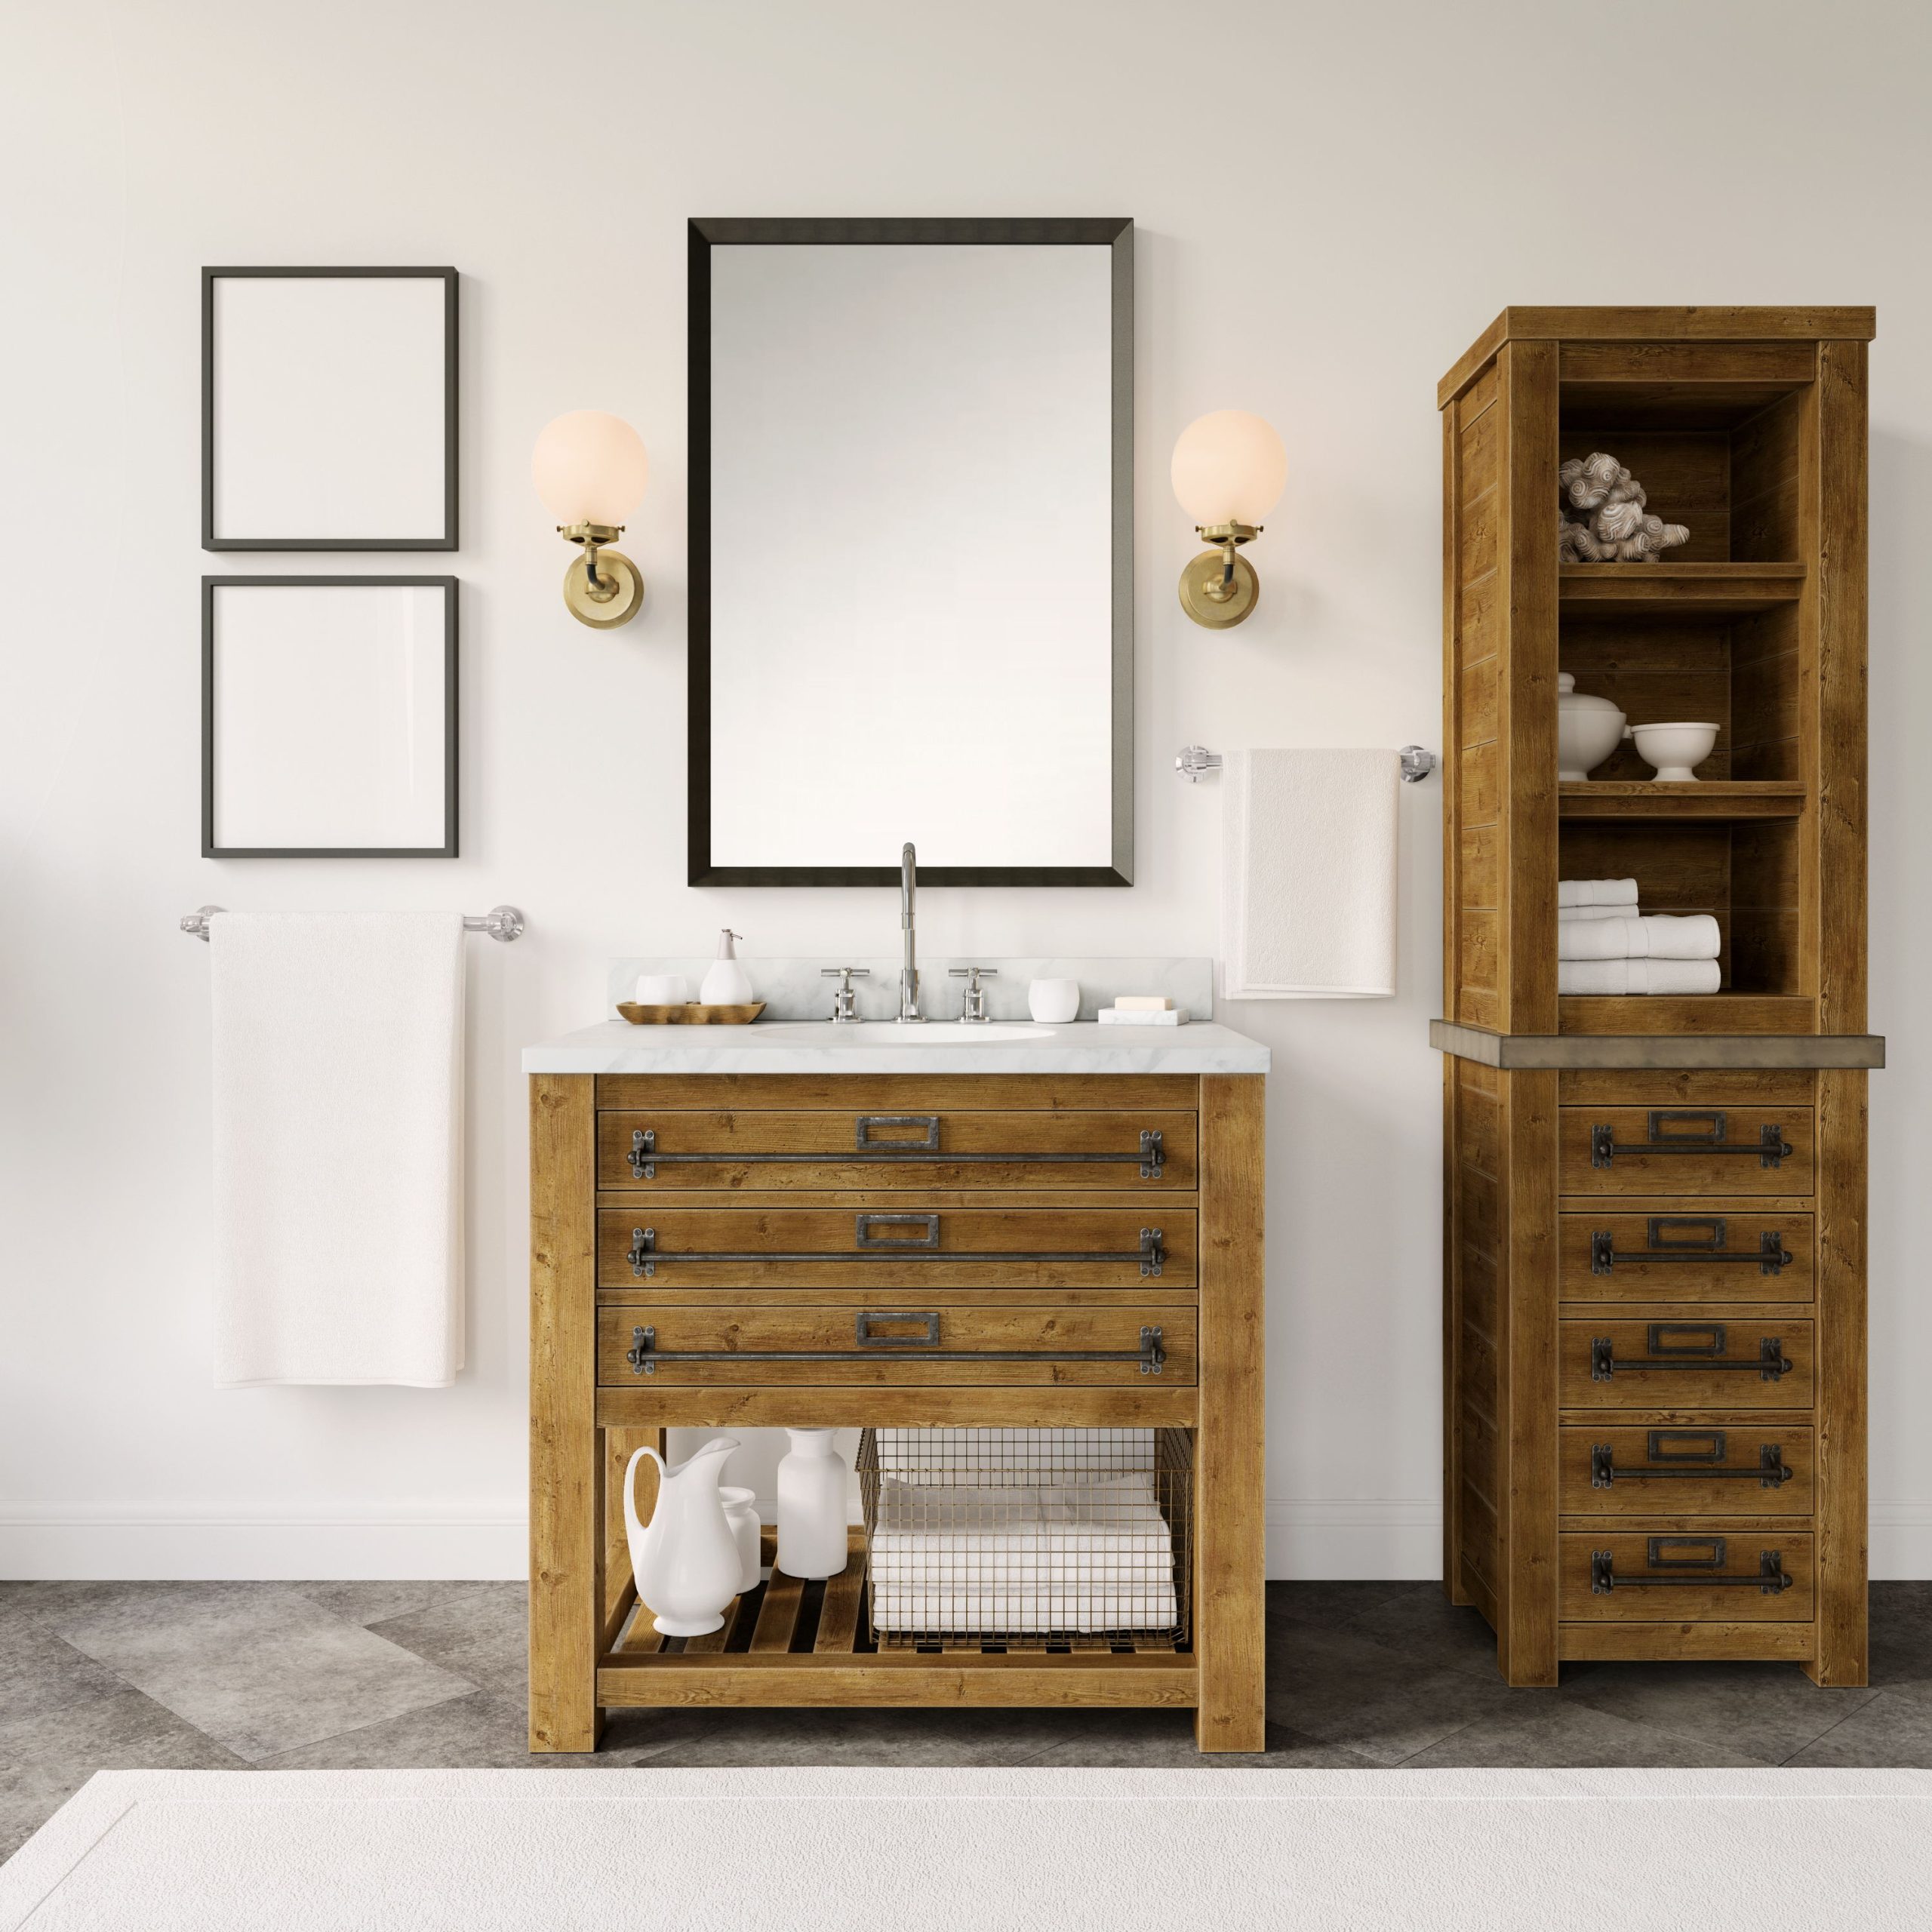 How To Choose The Right Mirror Shape For Your Bathroom